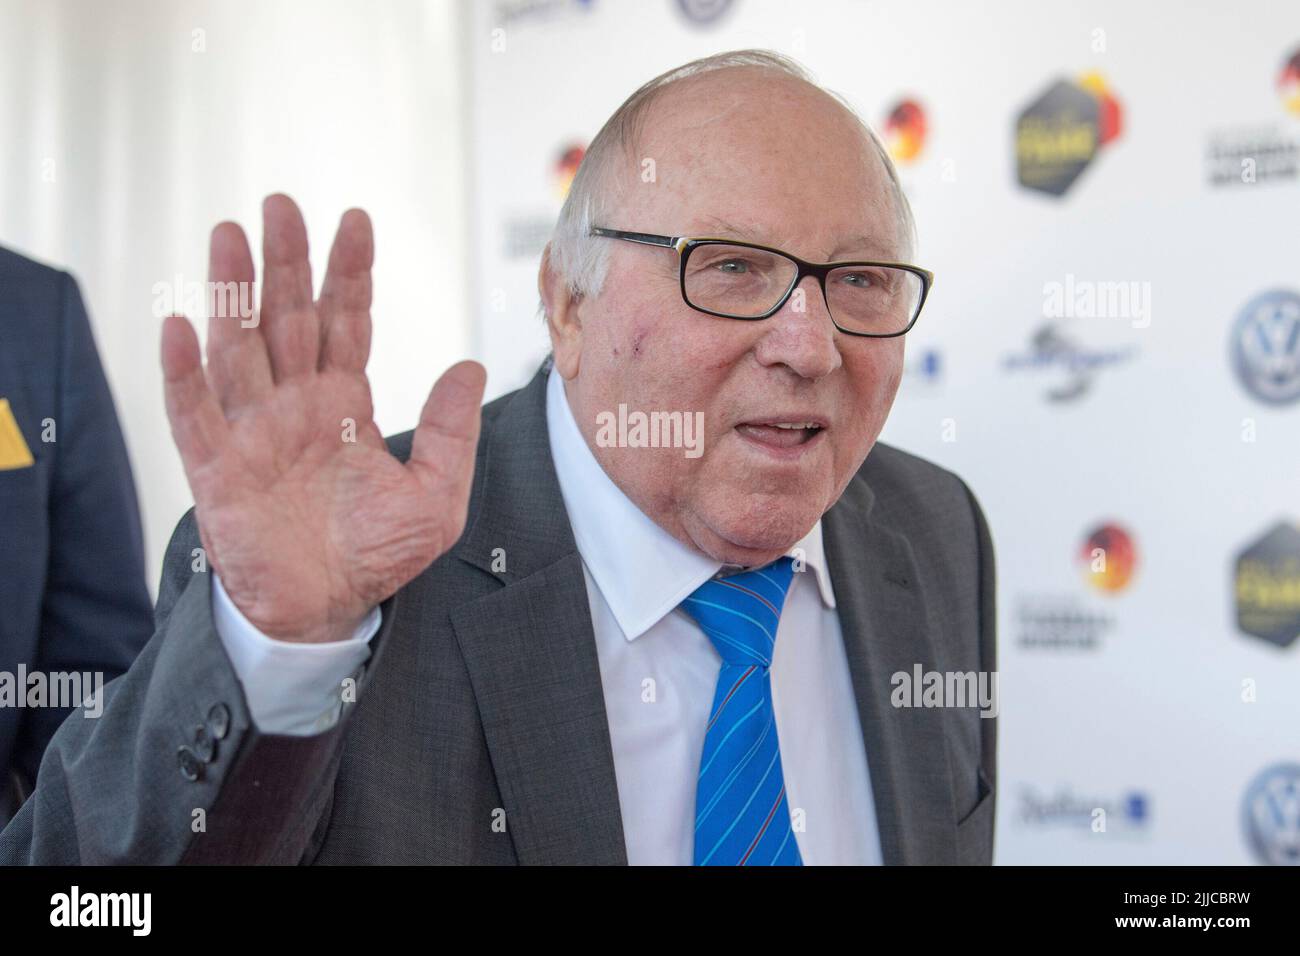 ARCHIVE PHOTO UWE SEELER DIED AT THE AGE OF 85 Uwe SEELER (former soccer professional) greets, greets, greeting, greeting, gesture, gesture, half-length portrait, red carpet before the award ceremony for the opening of the Hall of Fame of German soccer on April 1st, 2019 in Dortmund/Germany. © Stock Photo